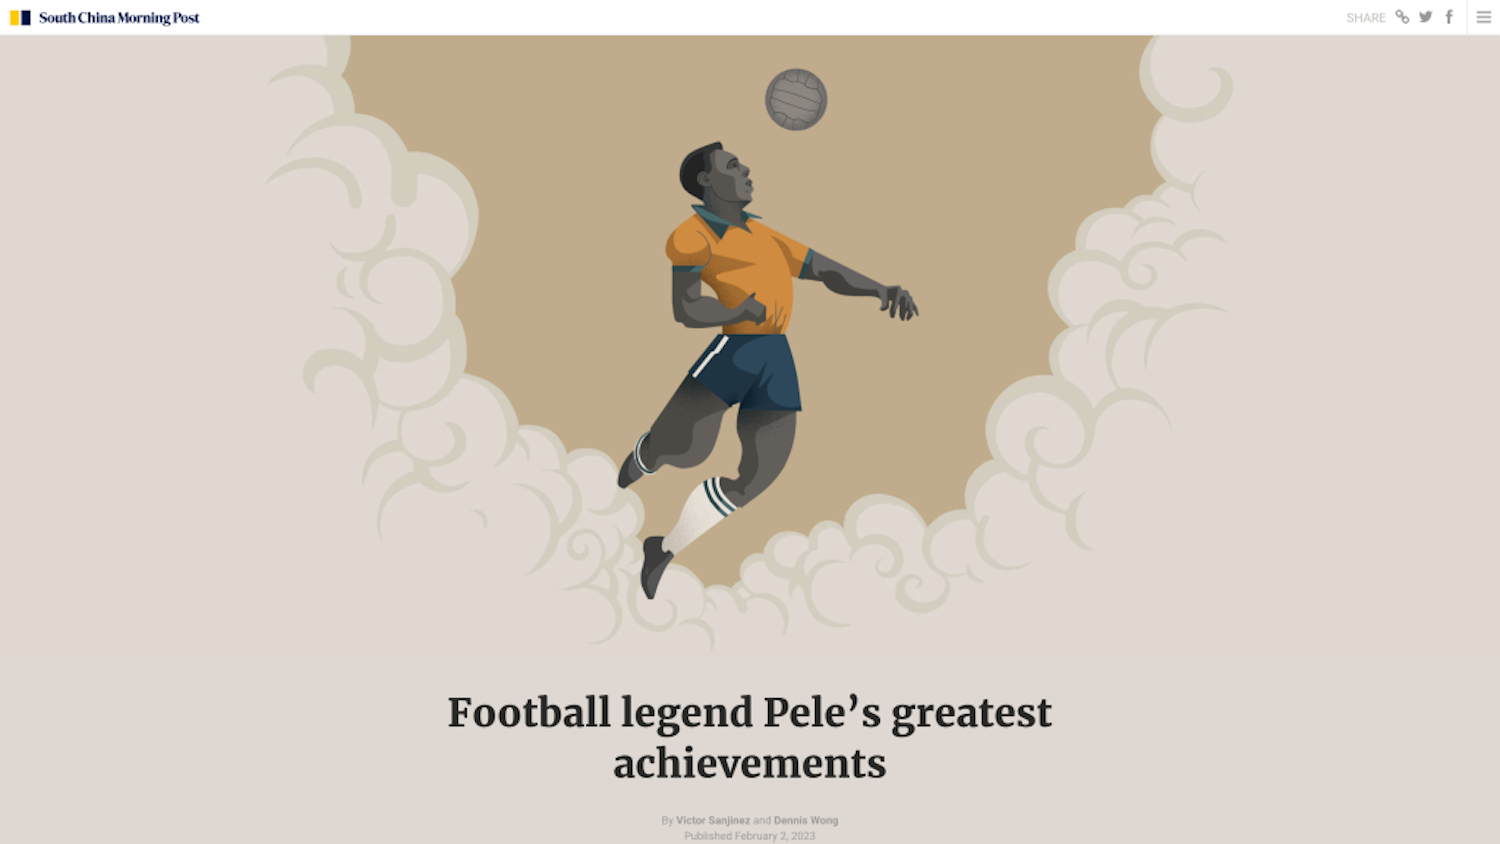 The landing screen of the Pele story site